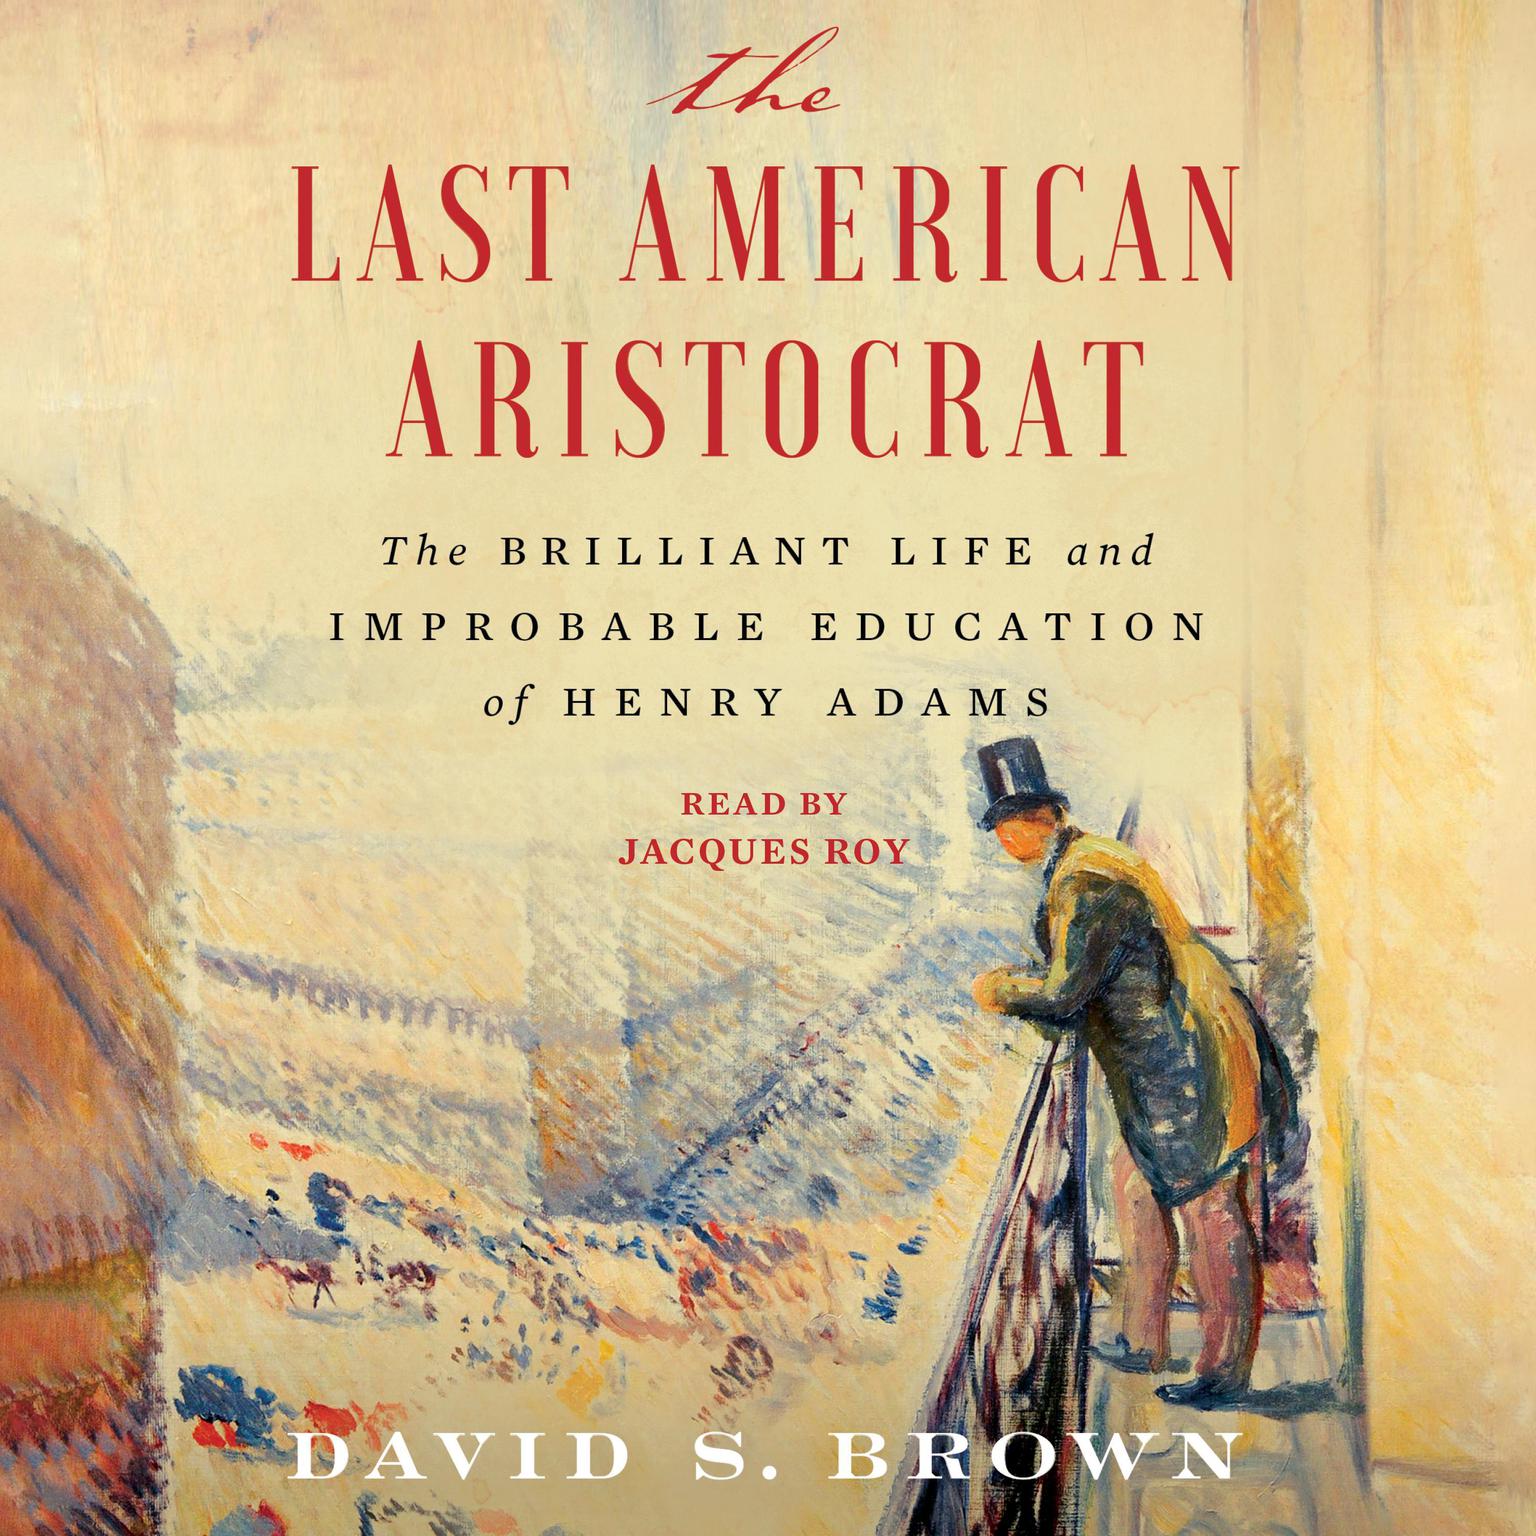 The Last American Aristocrat: The Brilliant Life and Improbable Education of Henry Adams Audiobook, by David S. Brown